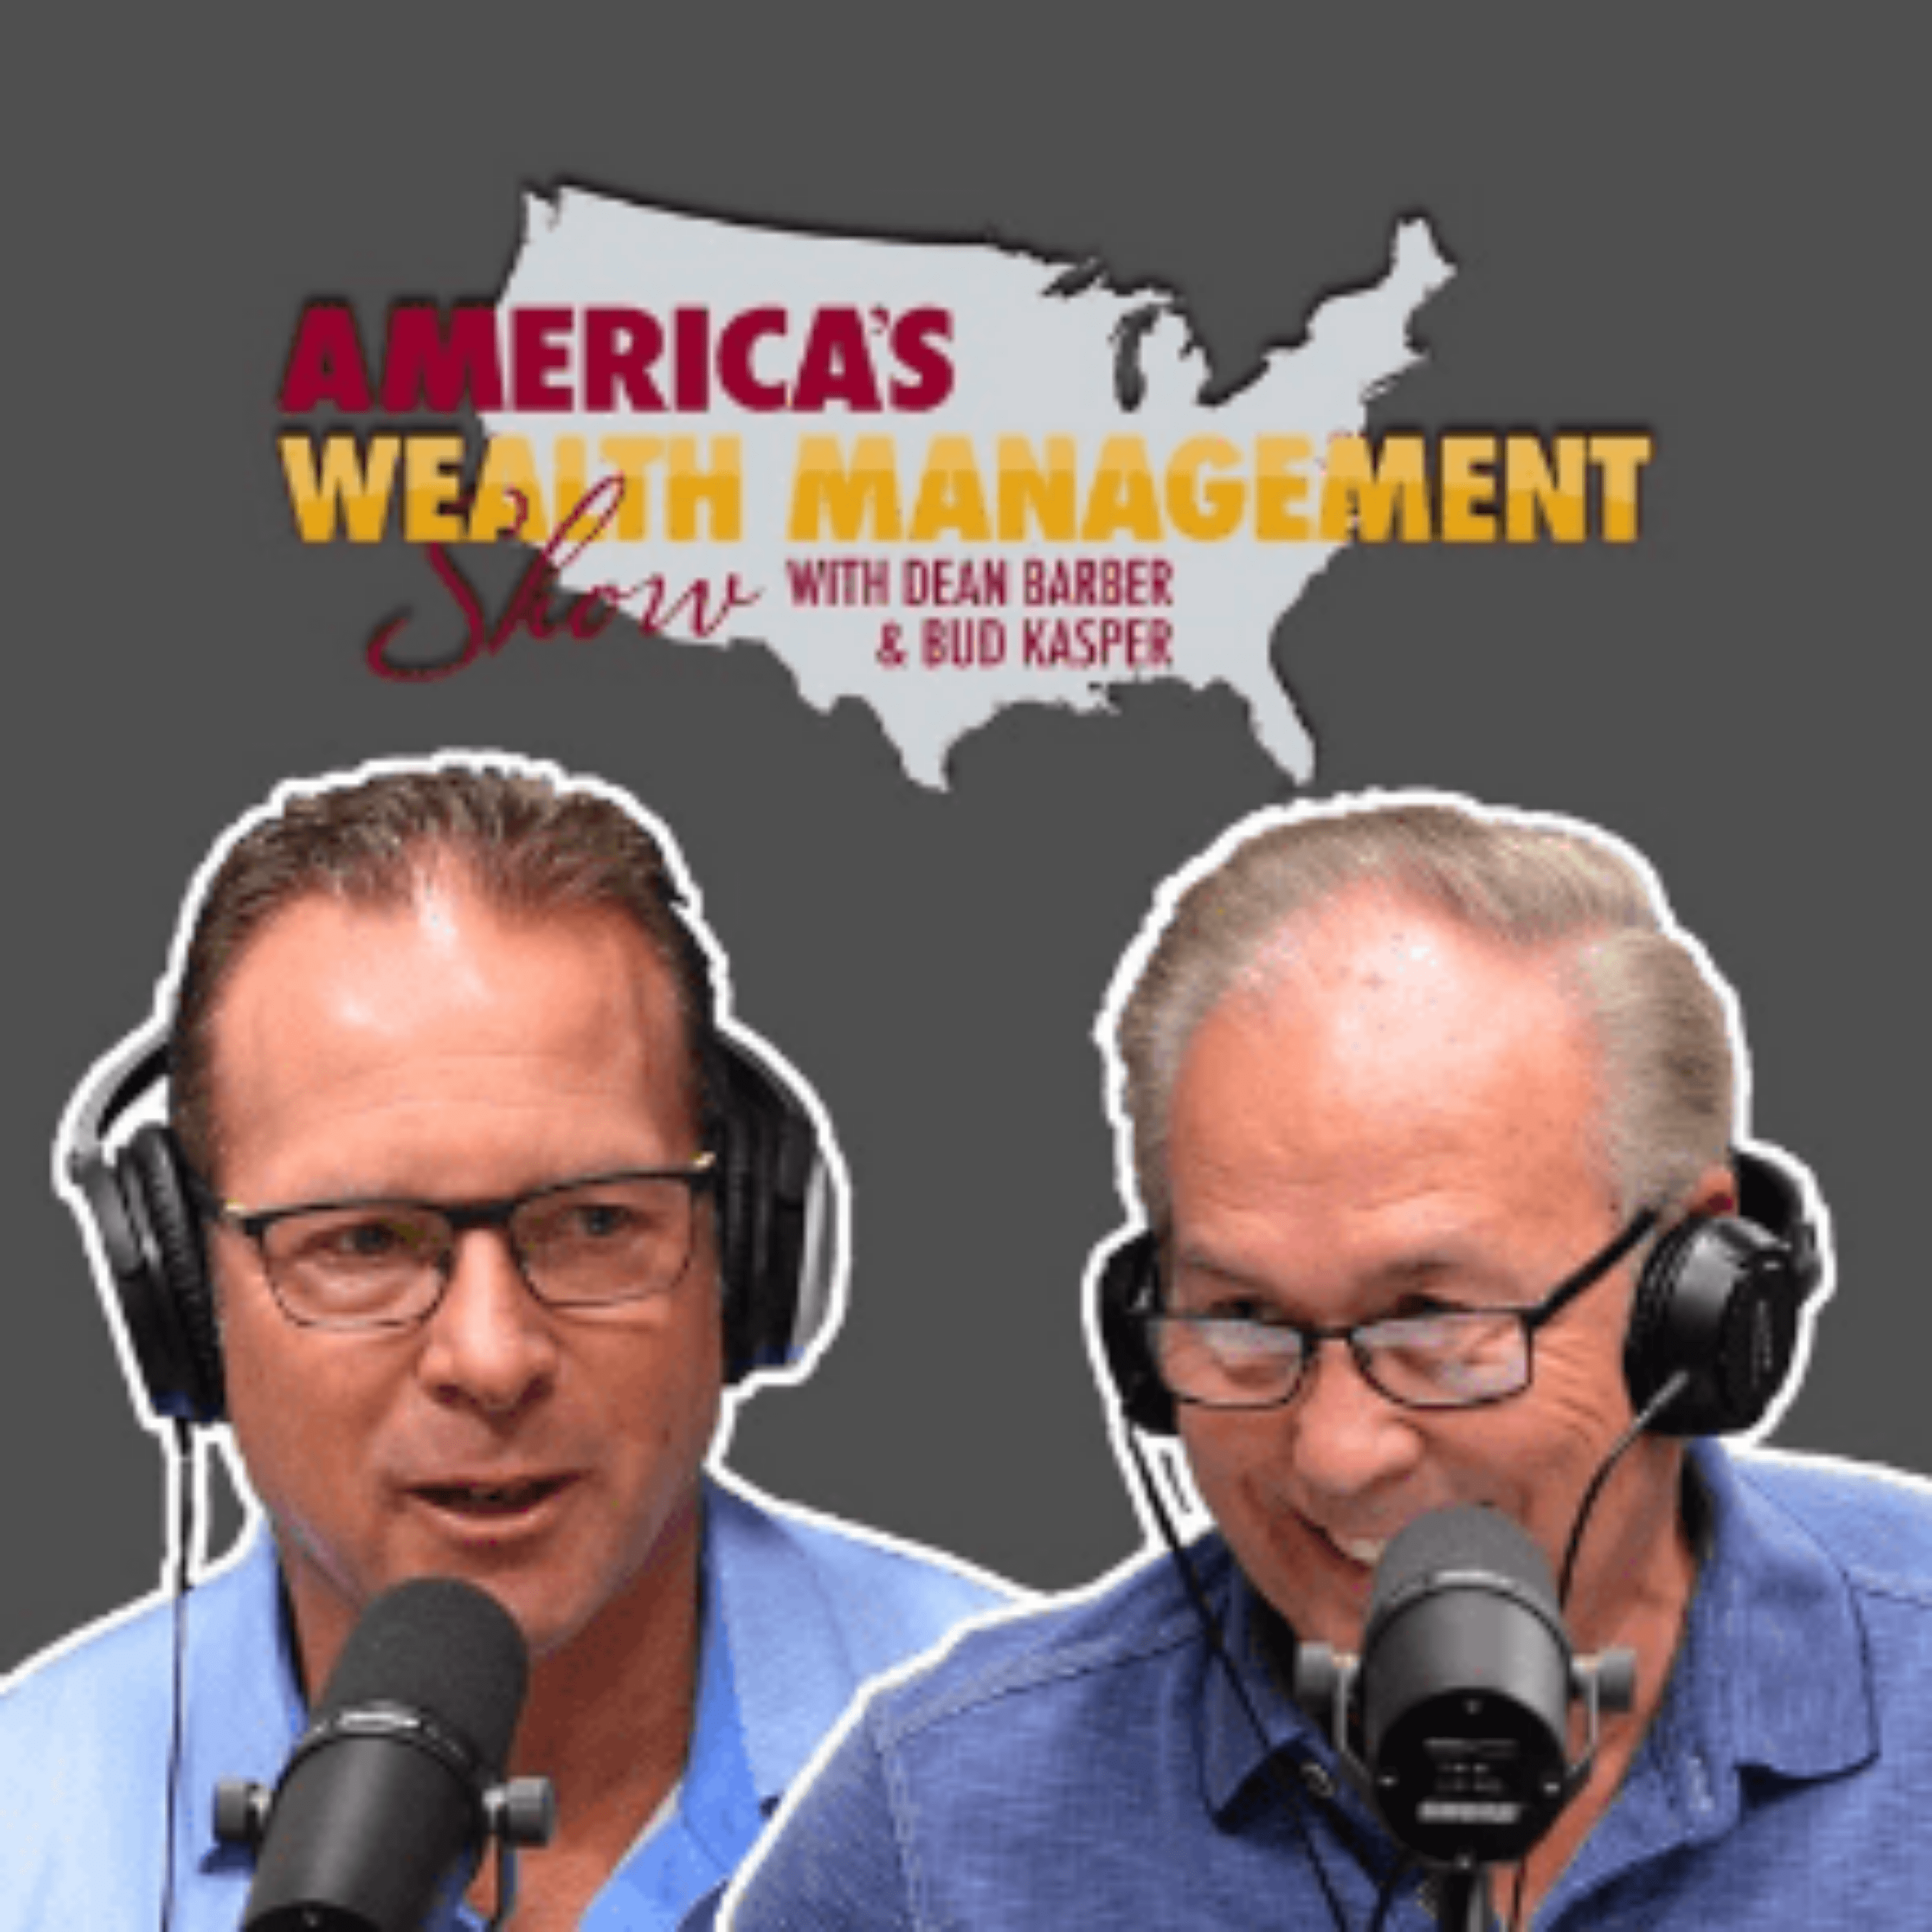 America’s Wealth Management Show with Dean Barber